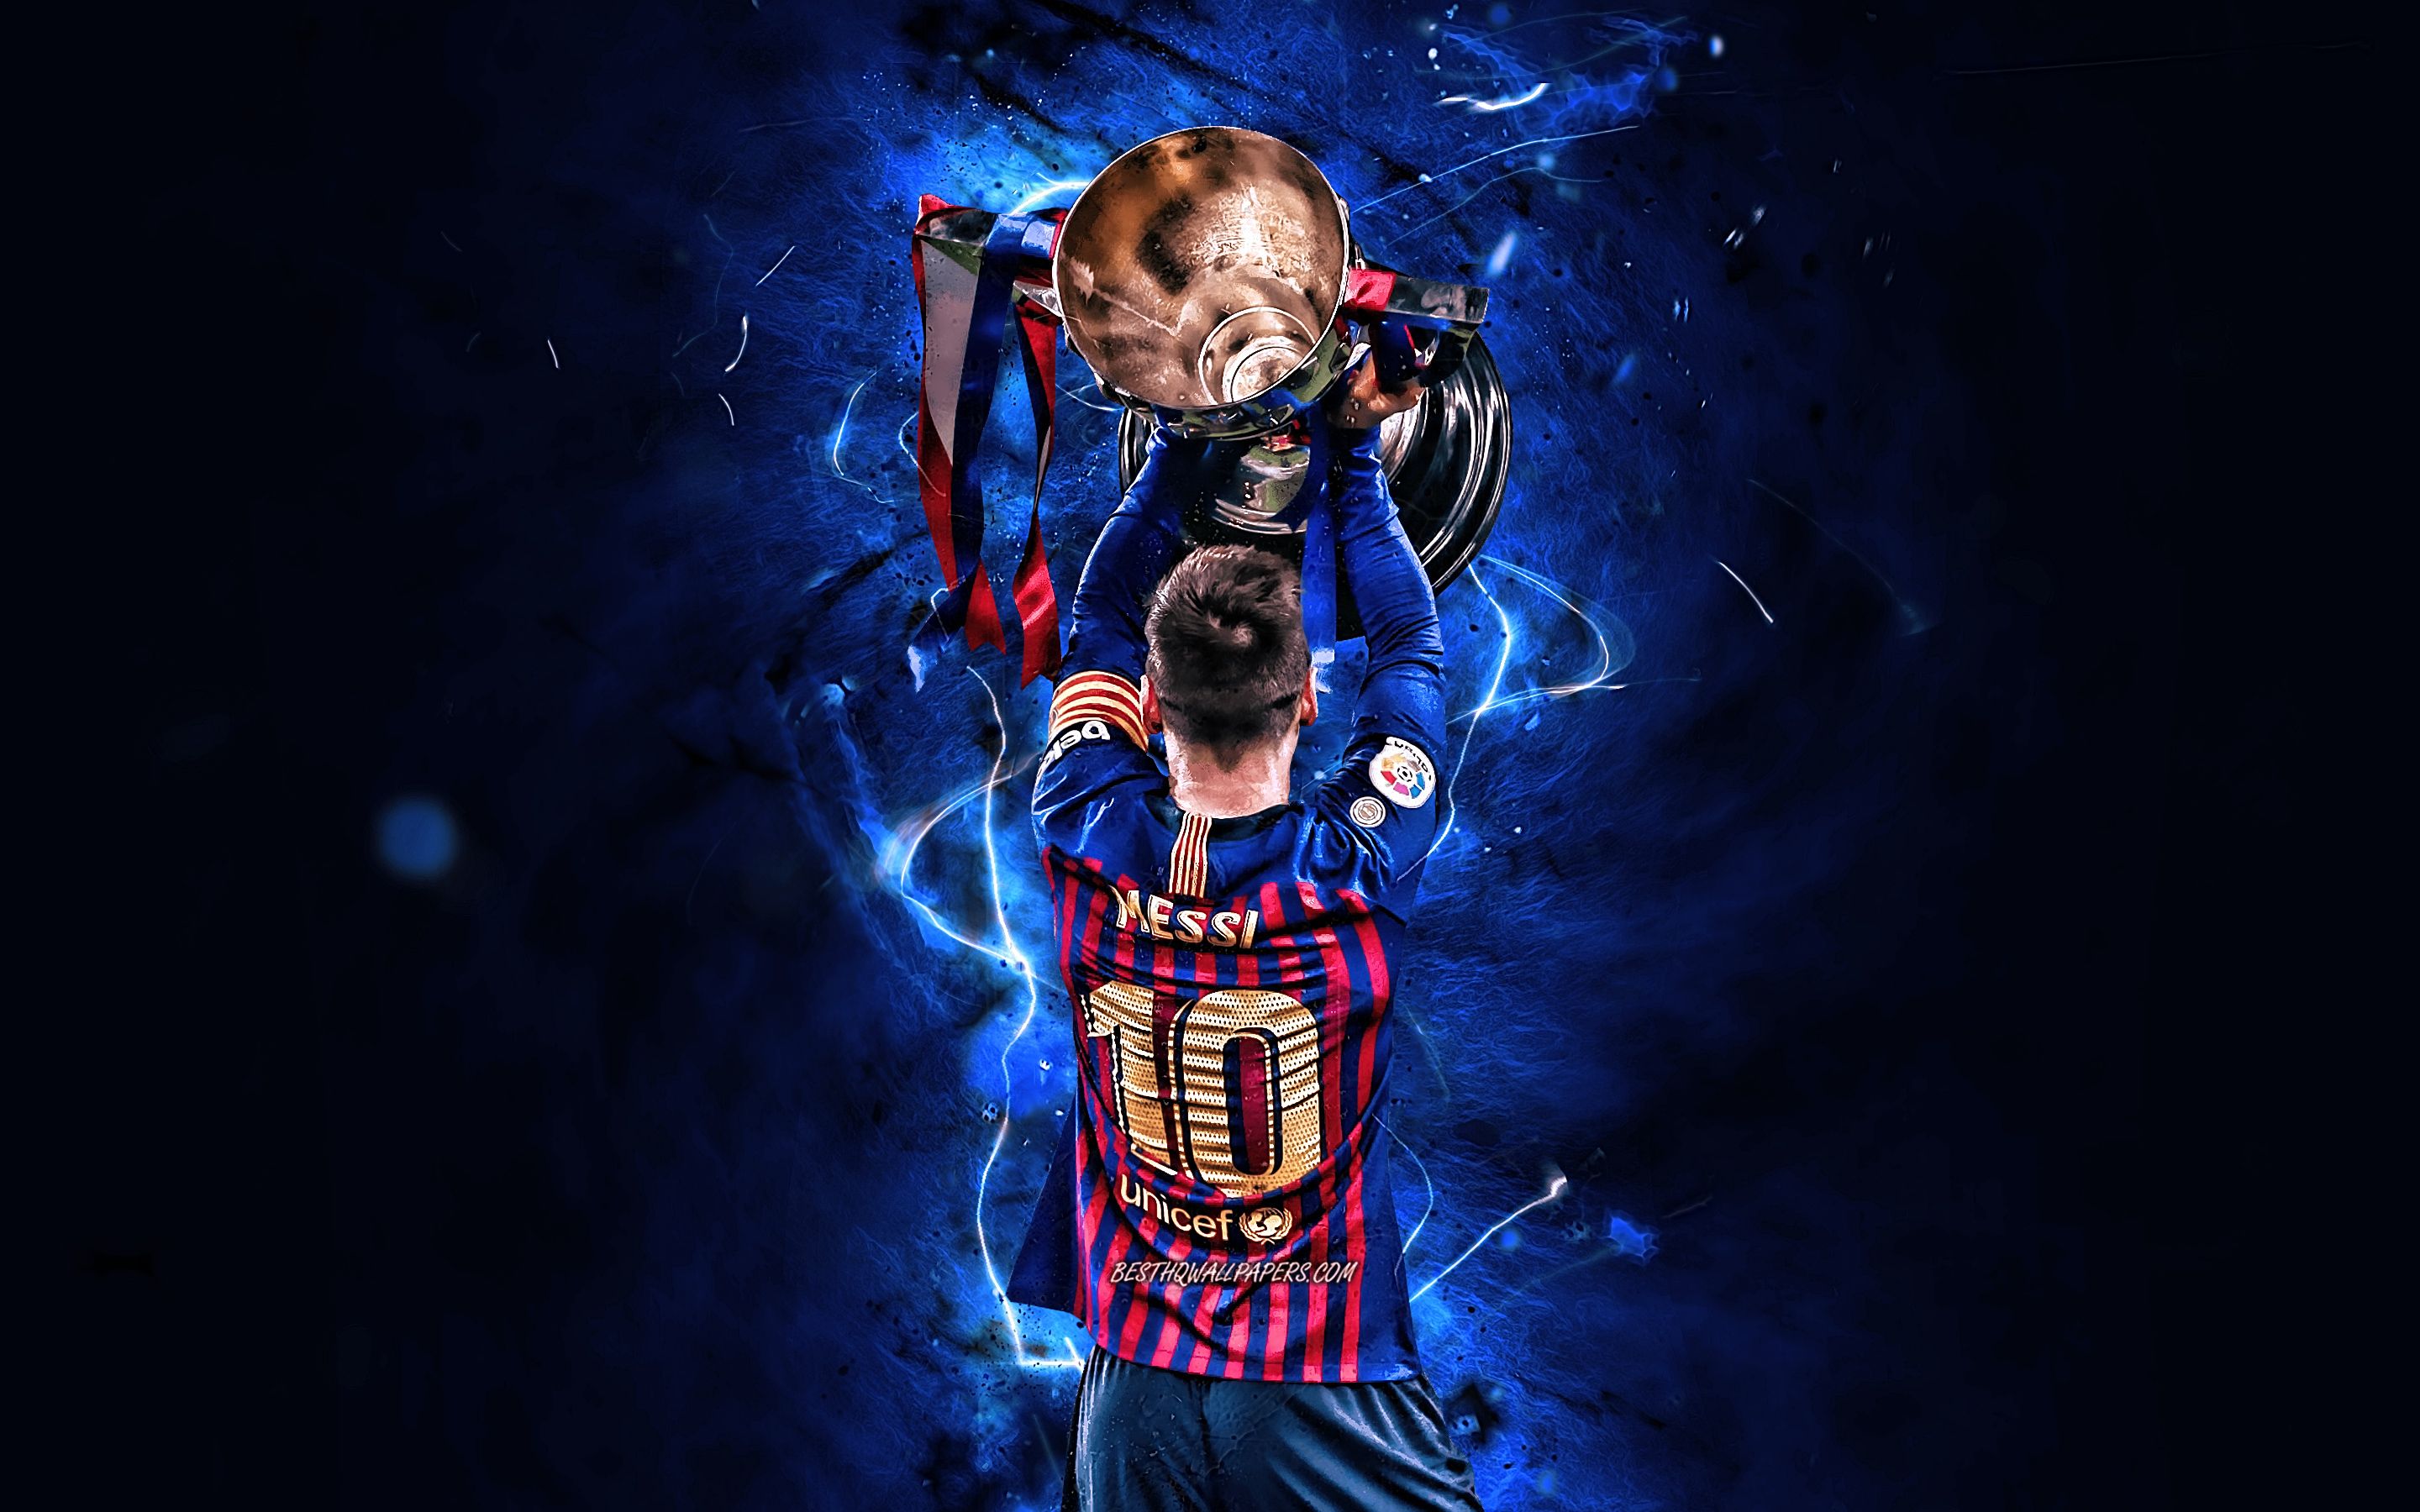 Download wallpaper Lionel Messi with cup, back view, Barcelona FC, argentinian footballers, joy, Lionel Messi, FCB, La Liga, Messi, Leo Messi, football stars, neon lights, LaLiga, Spain, Barca, soccer for desktop with